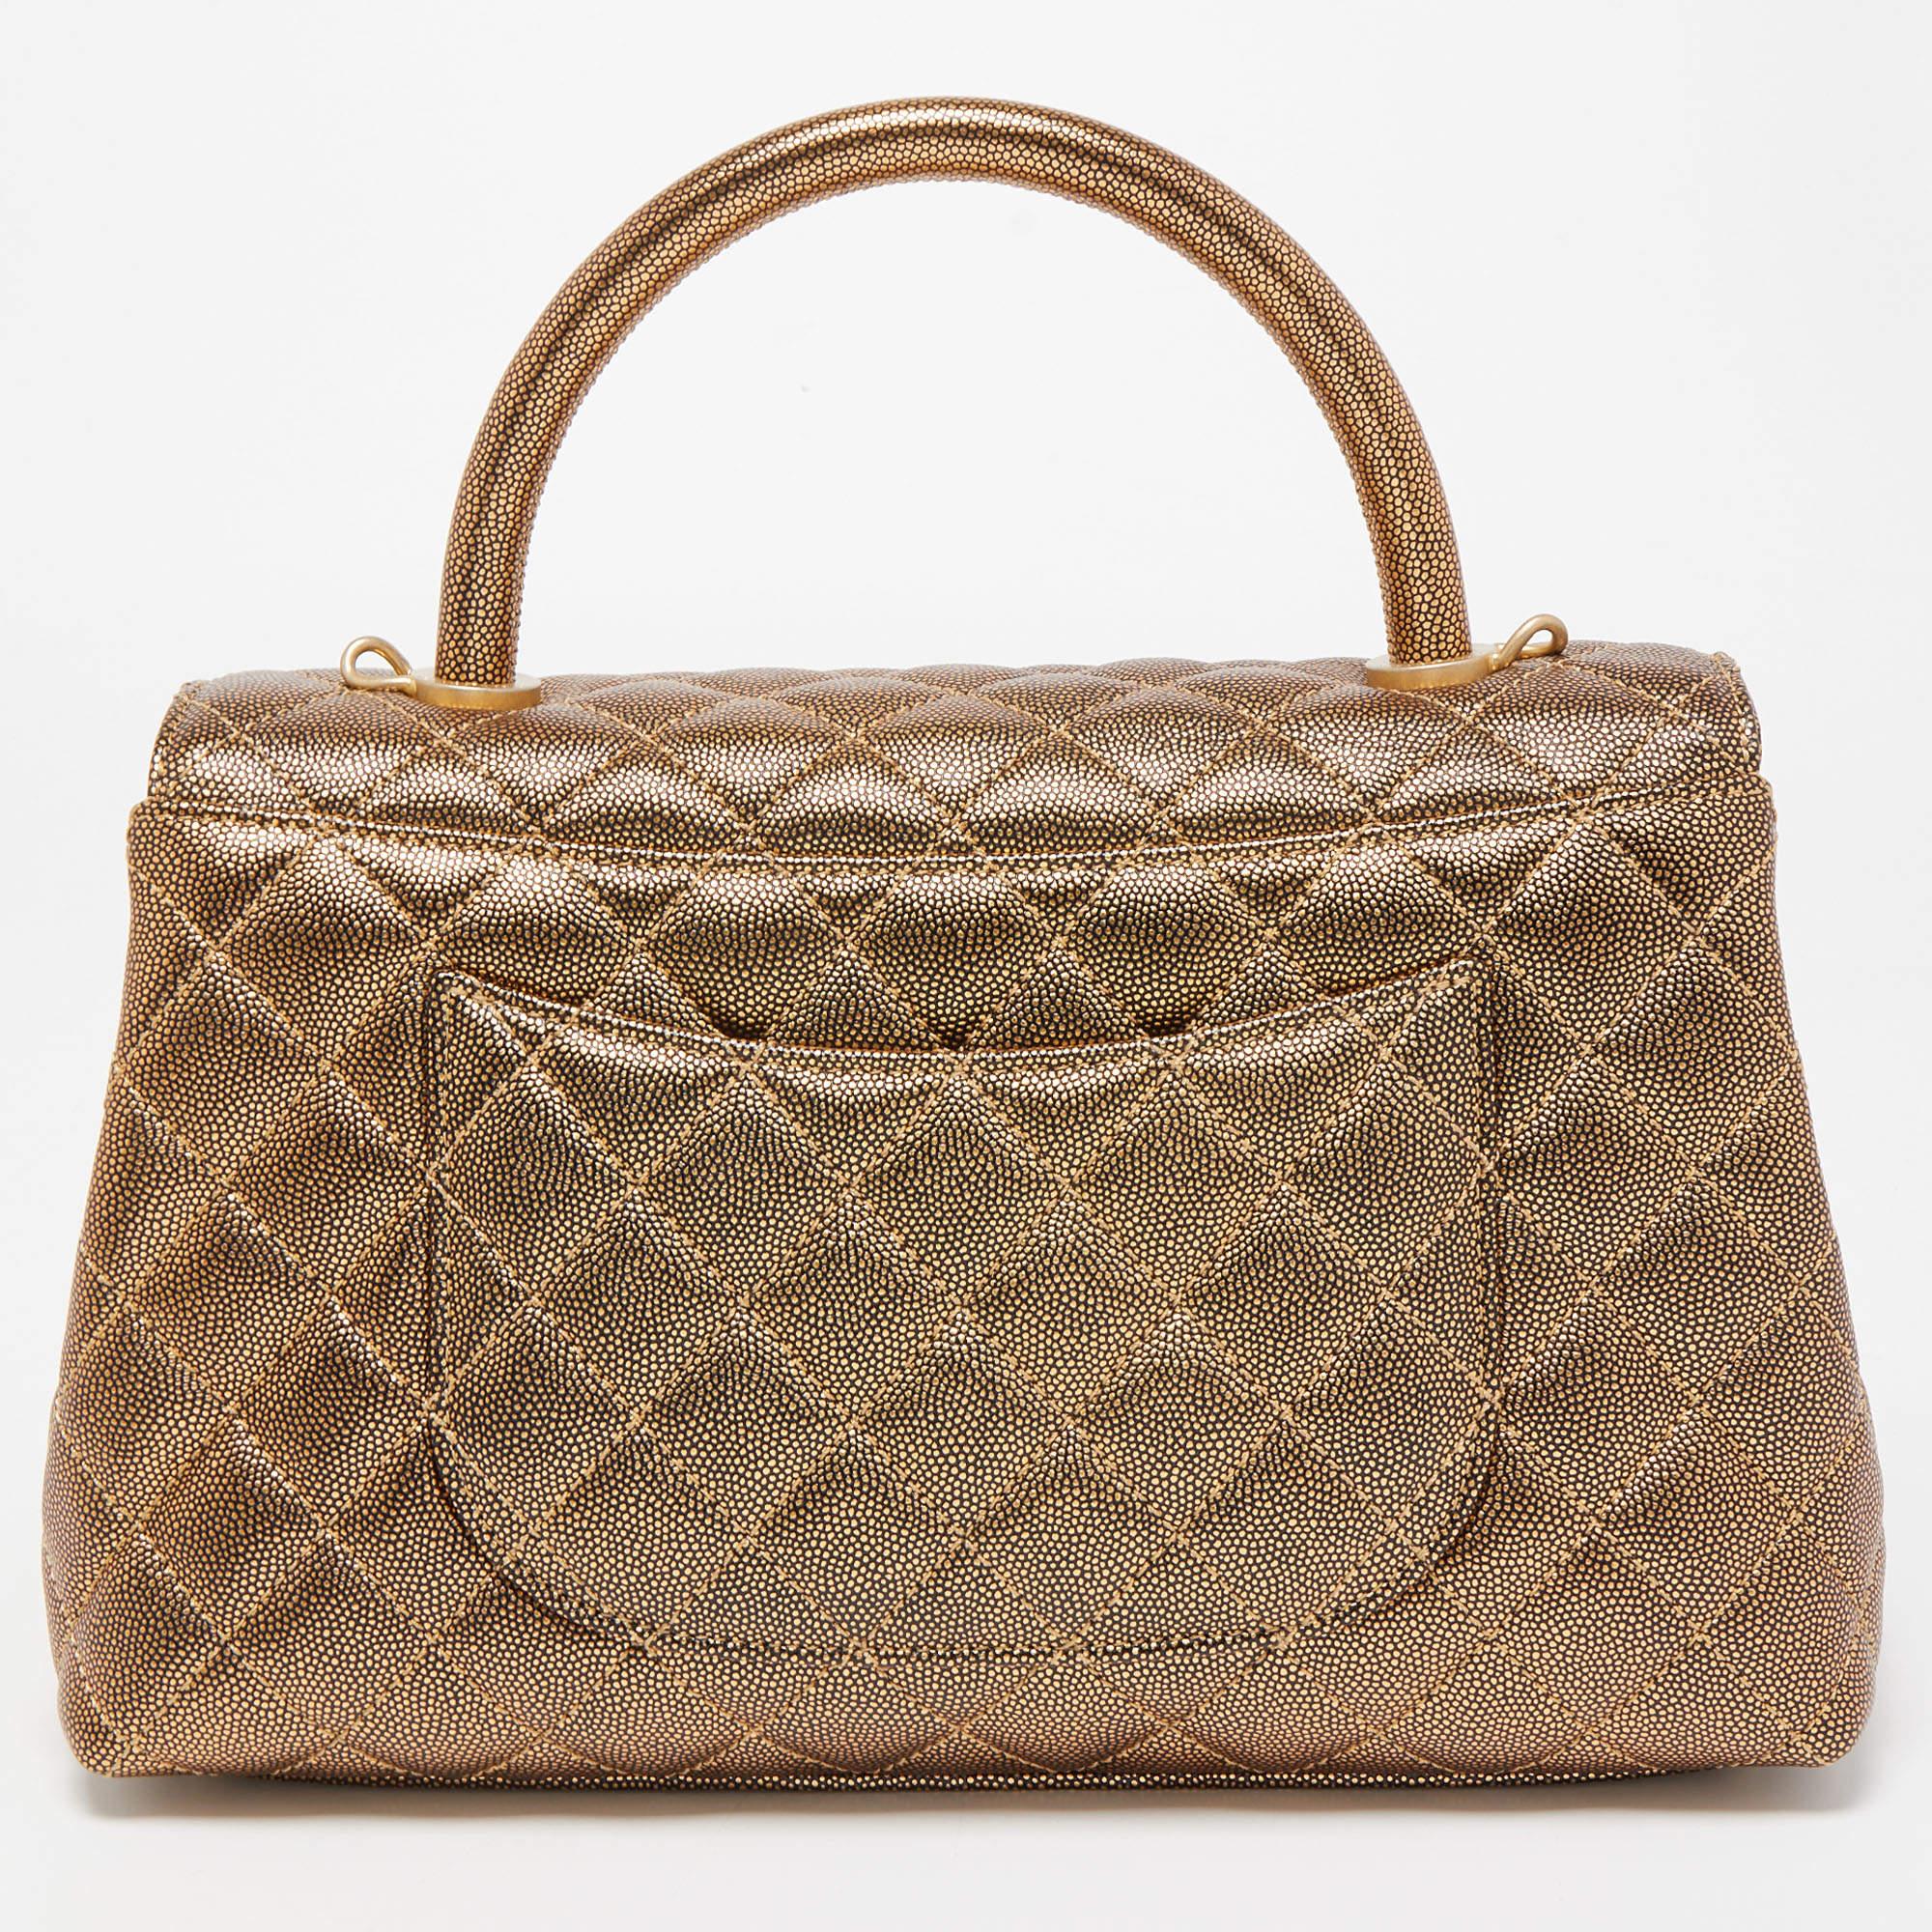 Every creation of Chanel maintains the legacy of the brand with its brilliant craftsmanship and artistic designs. From one of the most celebrated collections, this Coco bag comes exquisitely created from quilted Caviar leather and embodies an